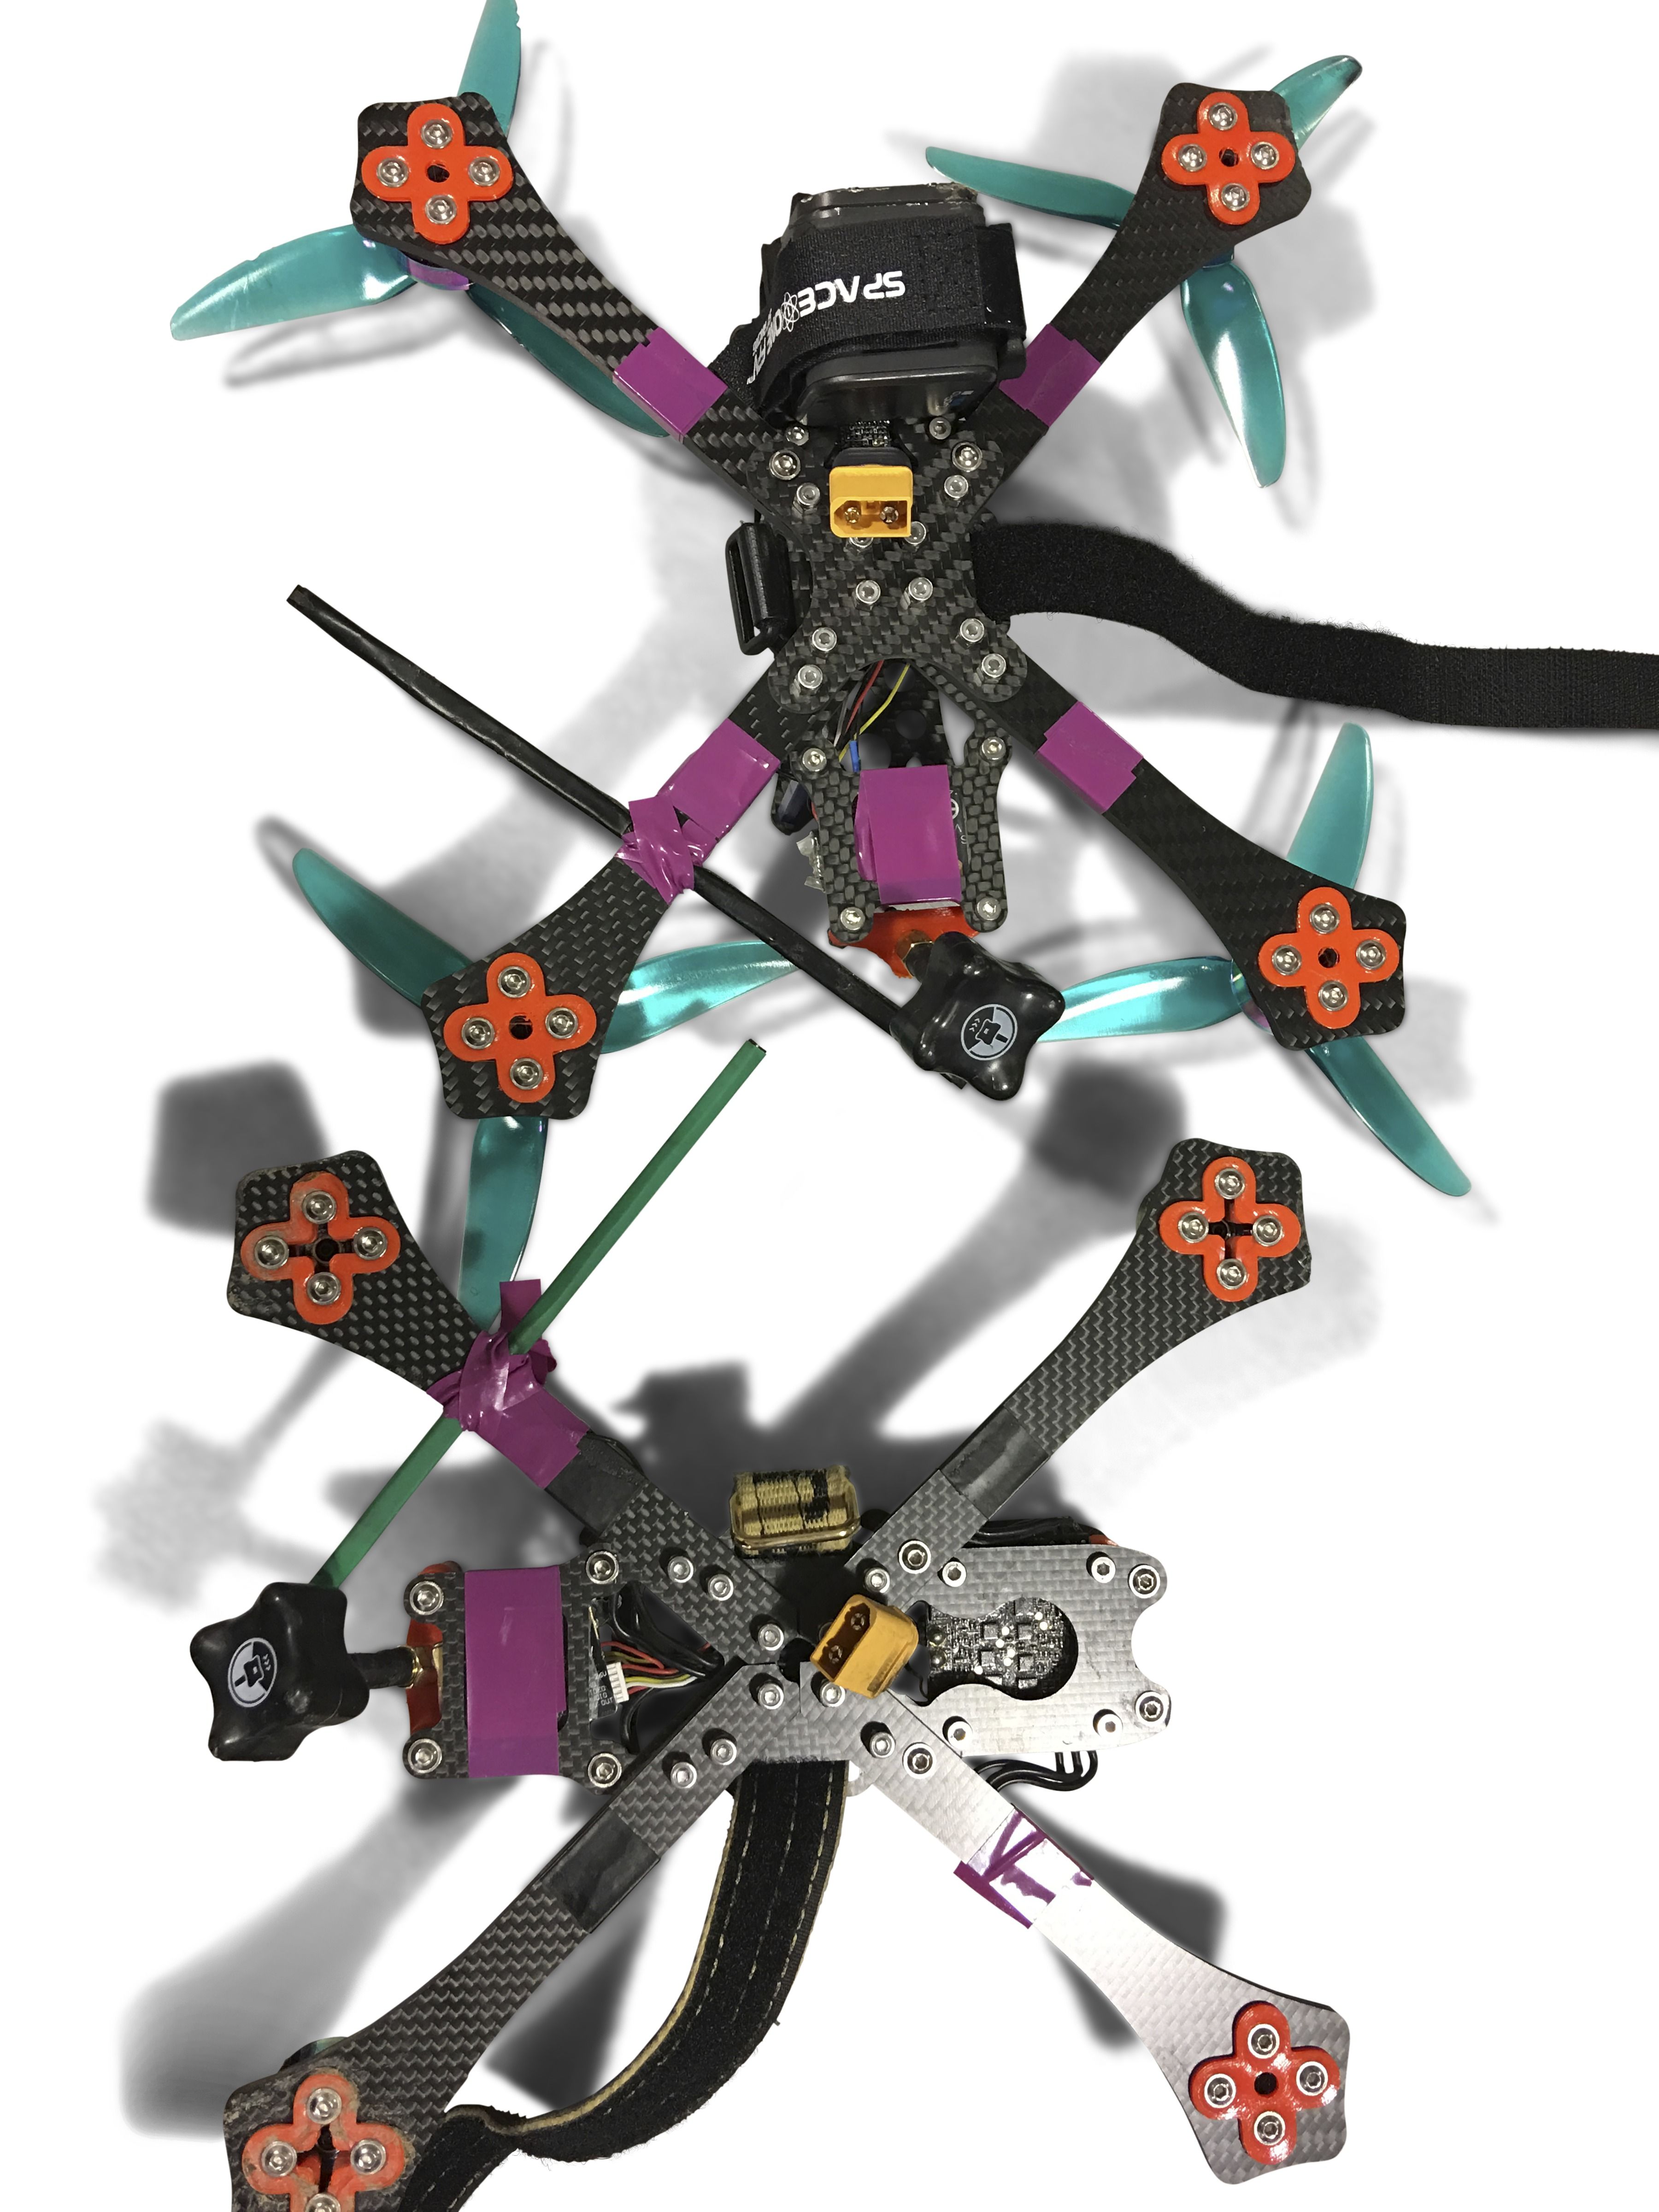 To Build Your Own Drone